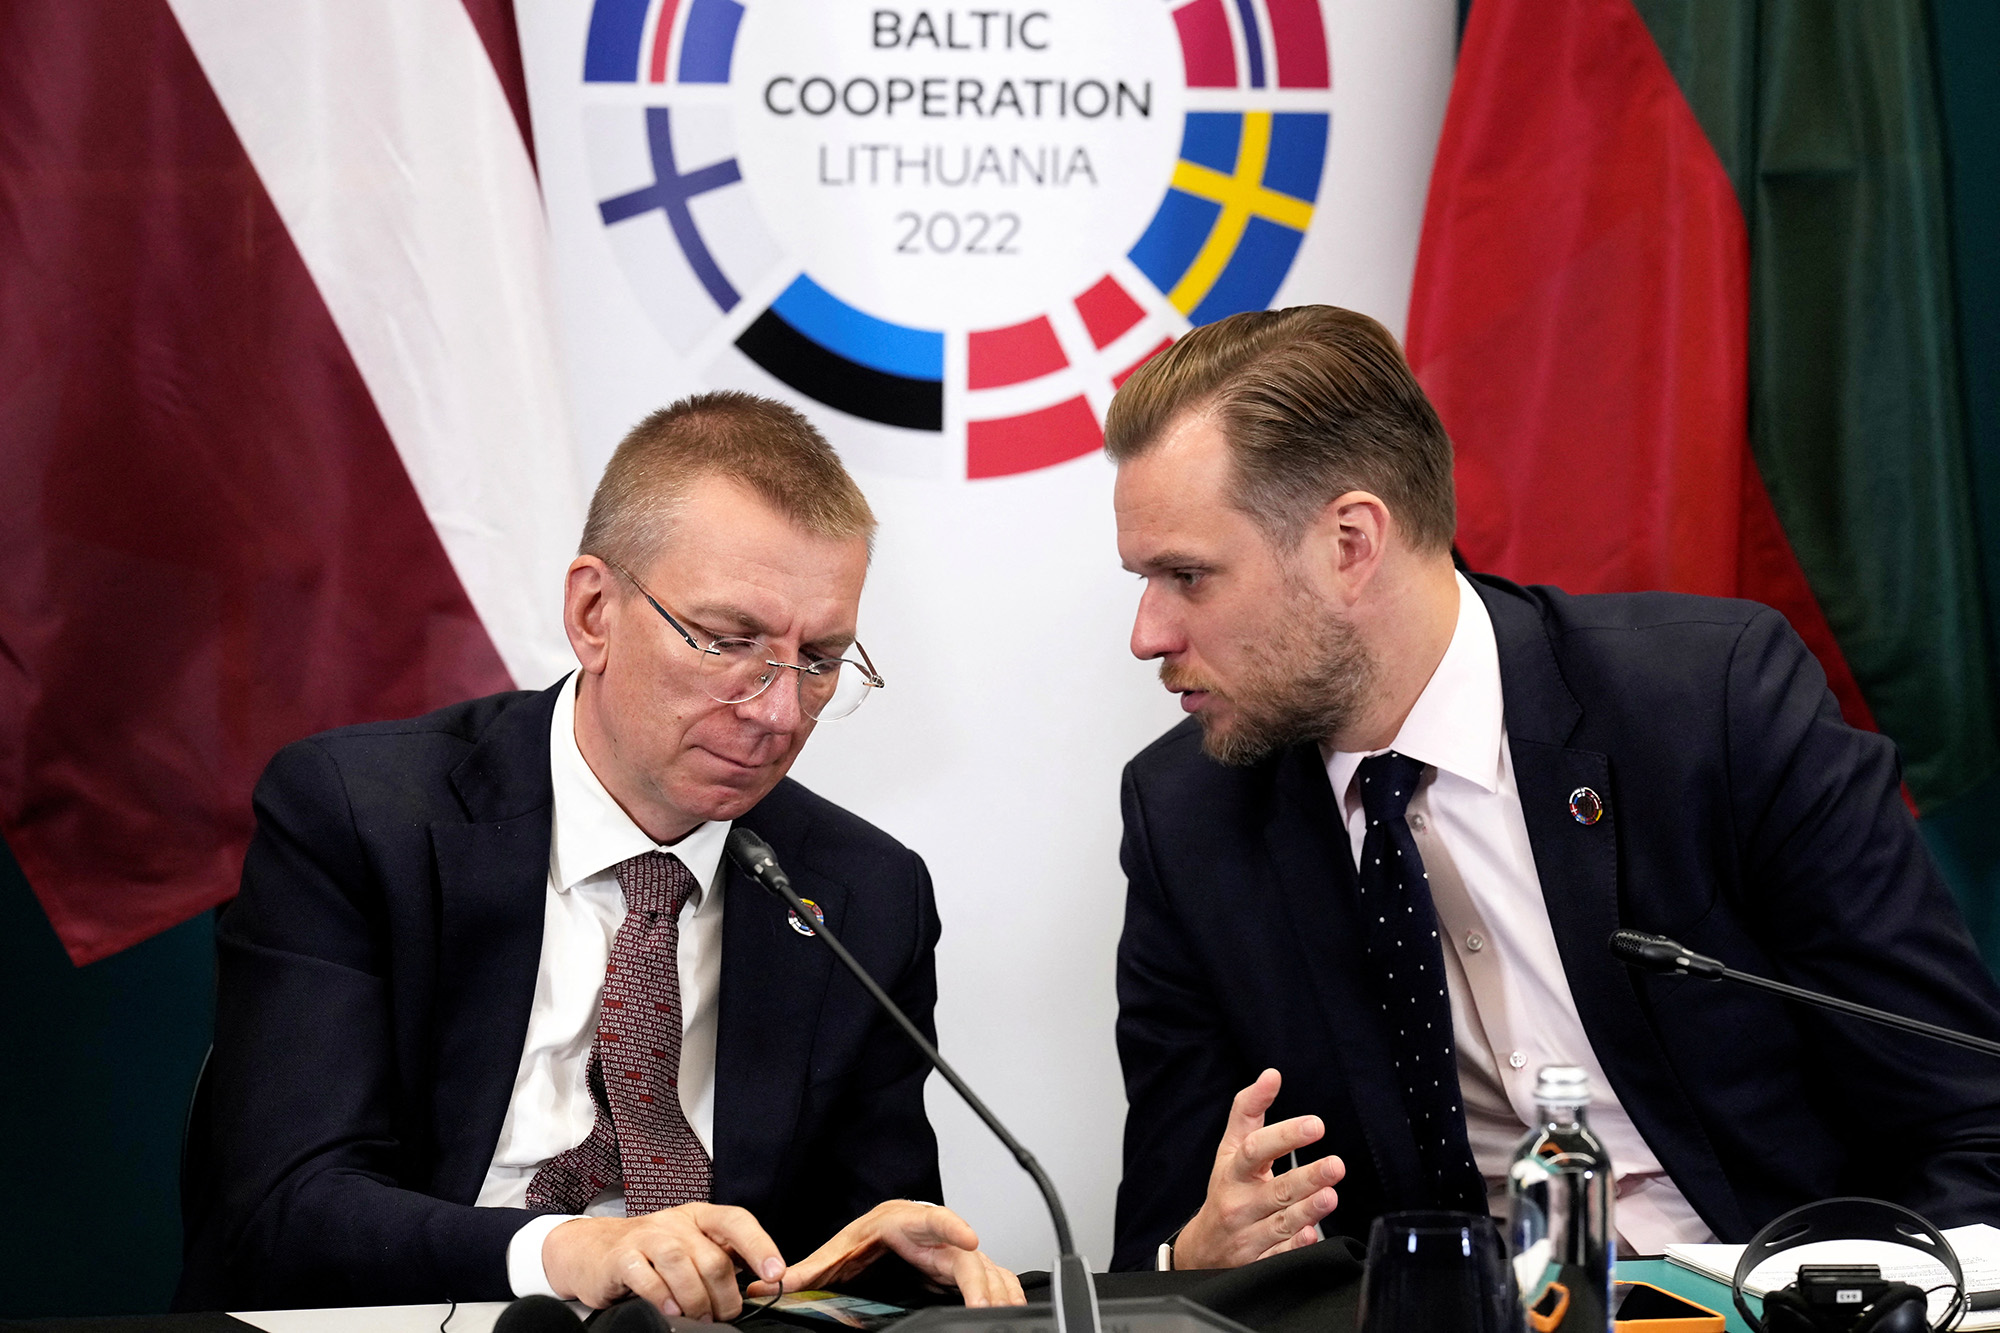 Latvia's Foreign Minister Edgars Rinkevics, left, and Lithuania's Foreign Minister Gabrielius Landsbergis attend the Nordic-Baltic cooperation (NB8) foreign ministers meeting in Kaunas, Lithuania, on September 7.